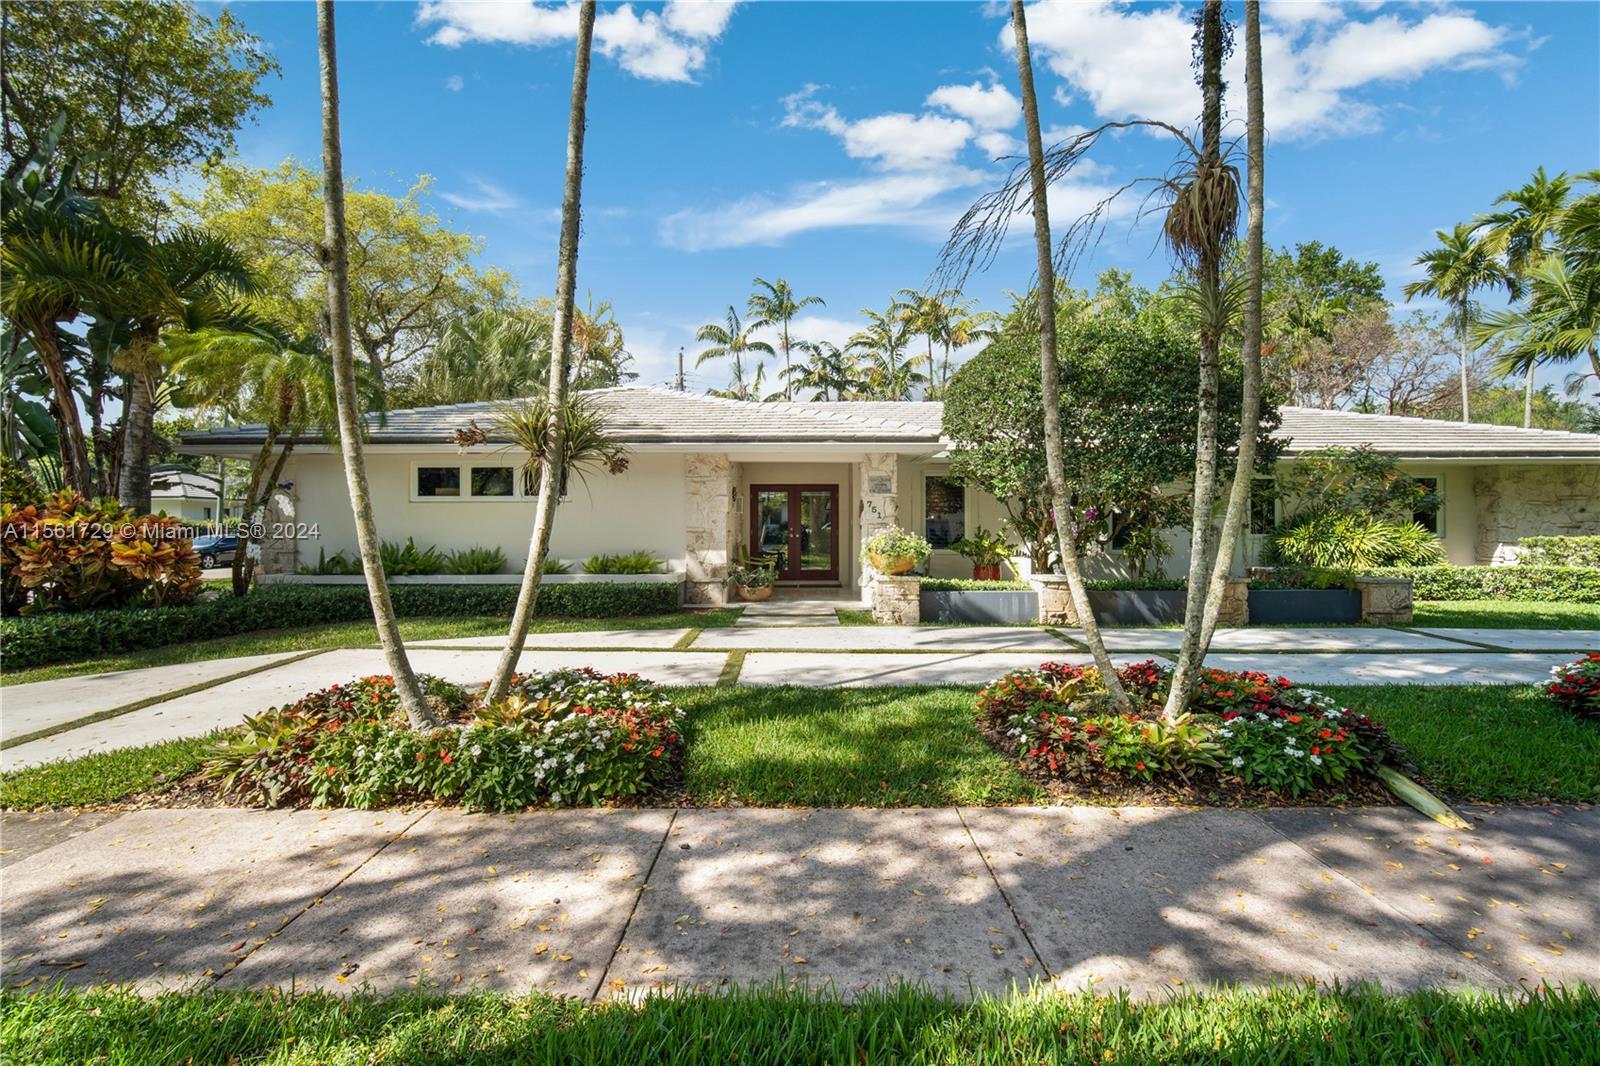 Sought after South Gables Location! Enter this lushly landscaped  5 bedroom / 4 bath gem which featu